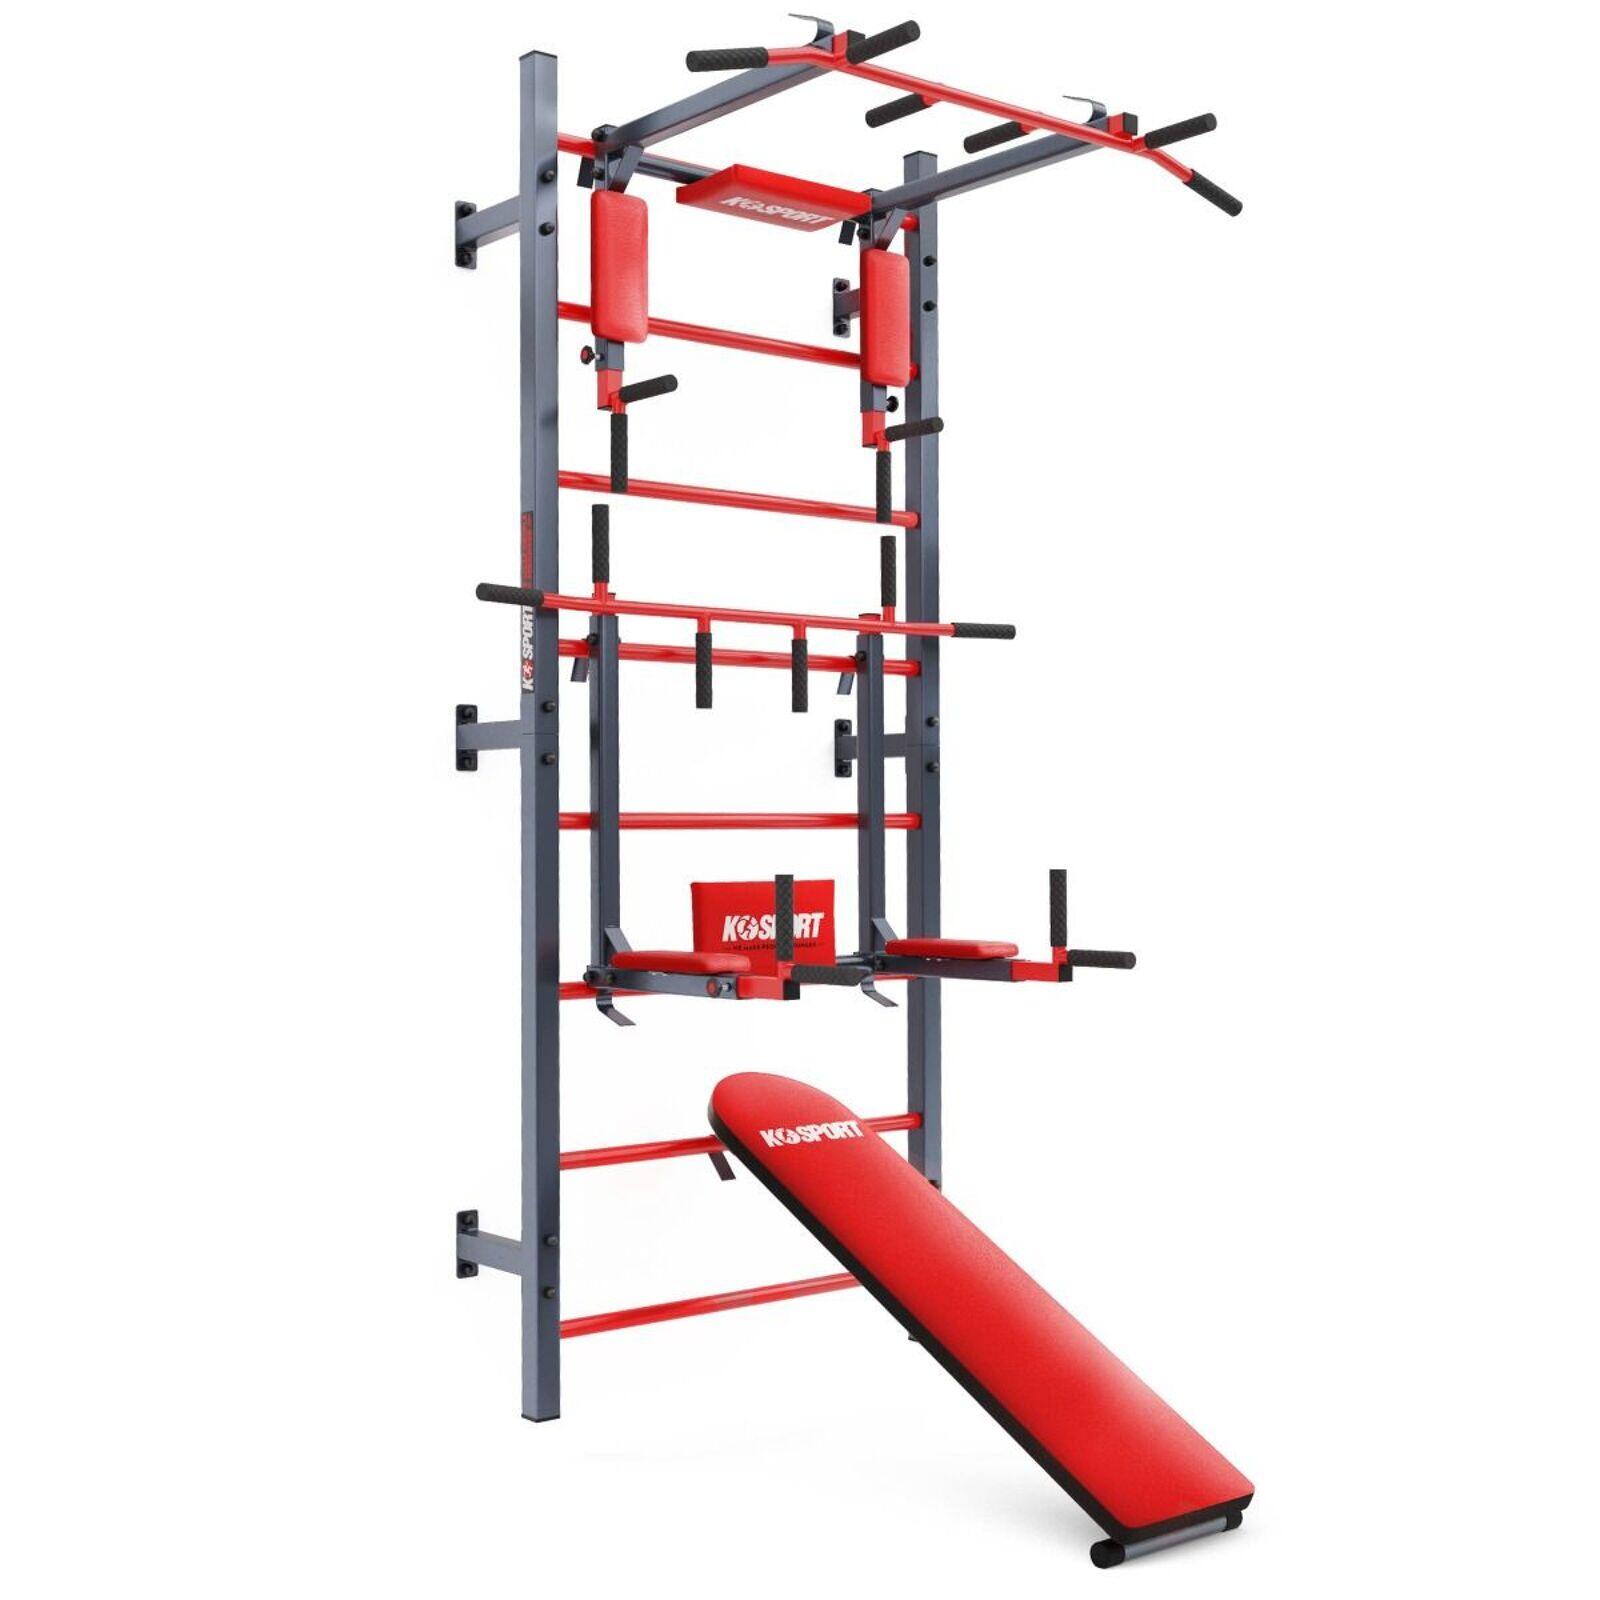 K-SPORT Wall Bars Swedish Ladder with Pull Up Dip Bar and Sit Up Bench Training Set